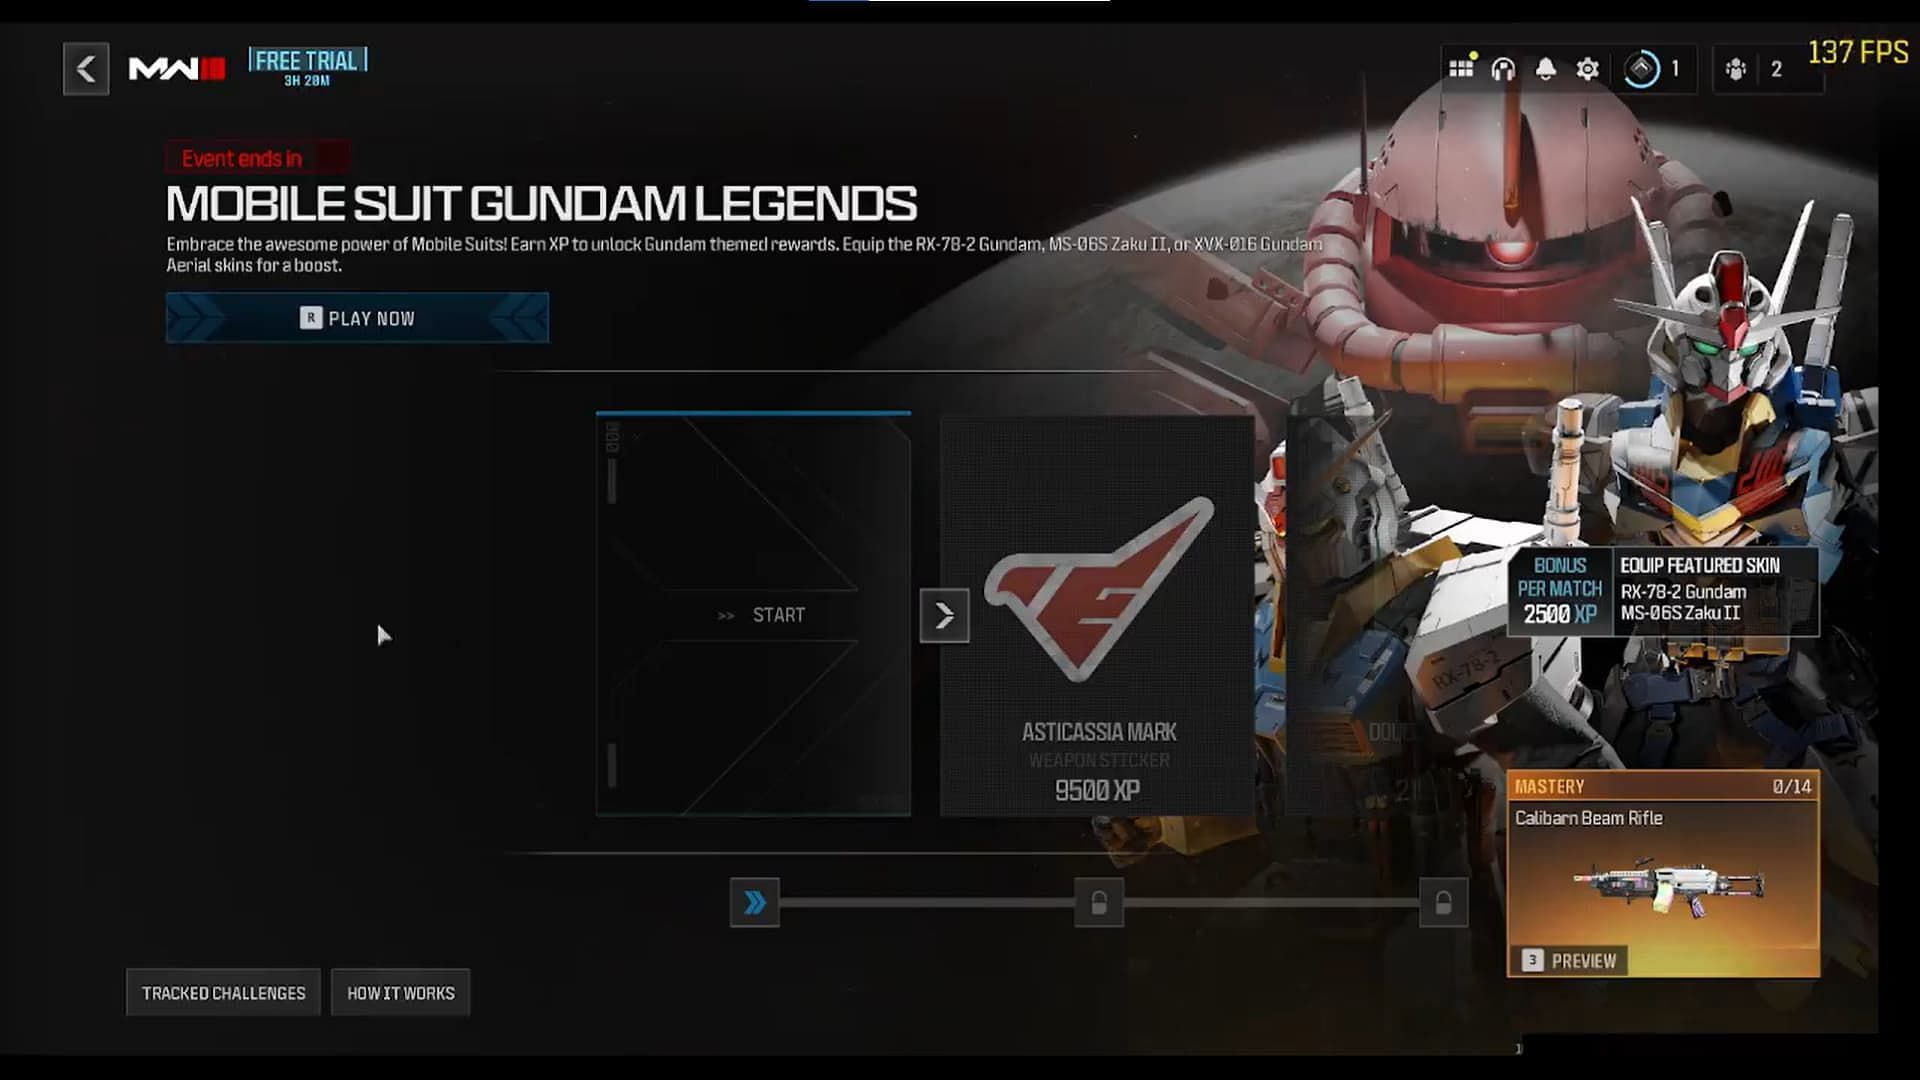 Gundam event in MW3 and Warzone (Image via Activision)